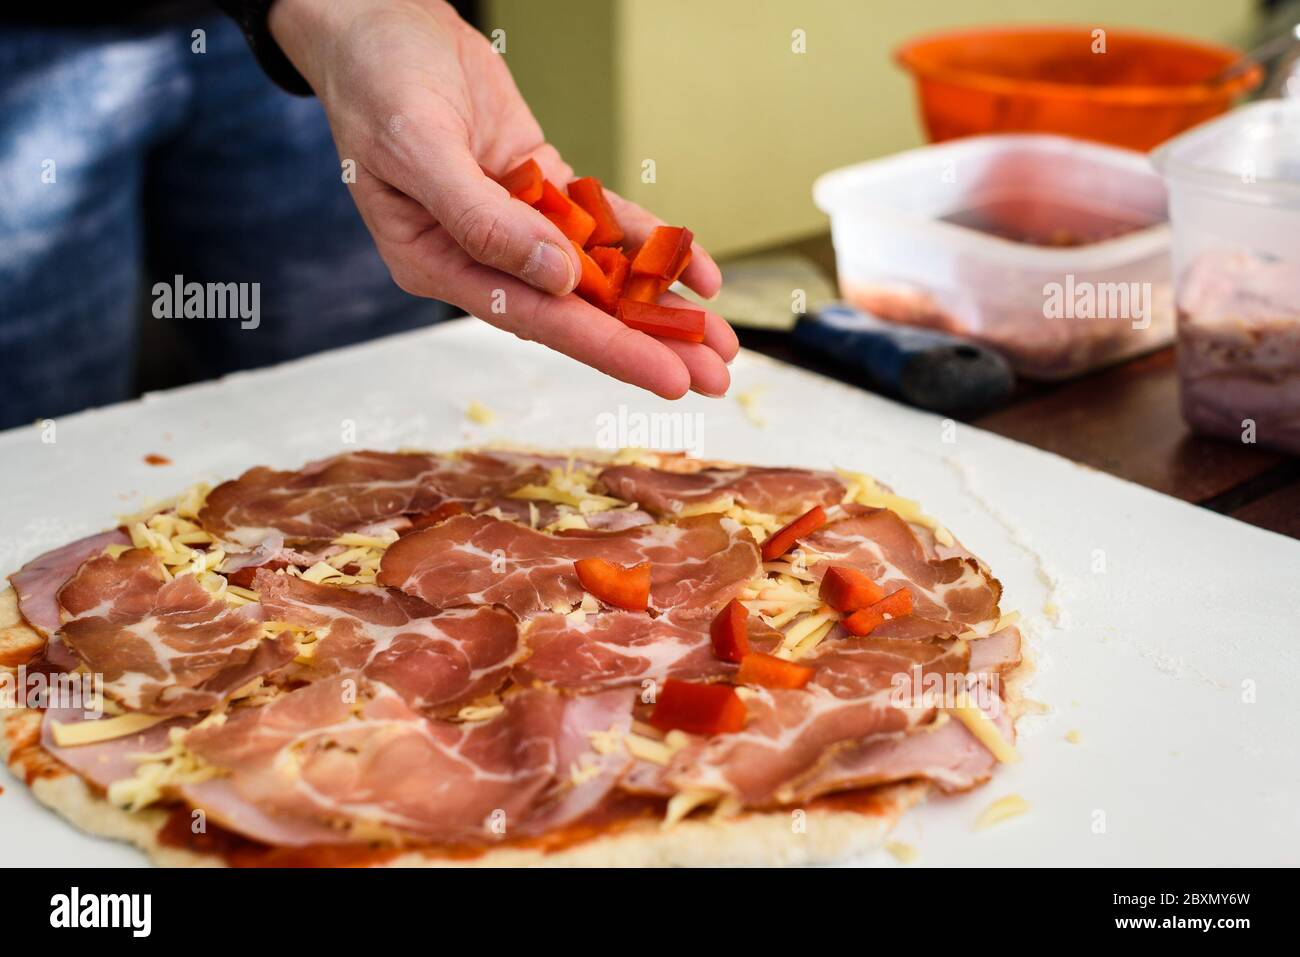 Making of homemade Italian pizza in fireplace brick oven. Making of pizza and adding different ingredients before baking it in outside fireplace. Hand Stock Photo